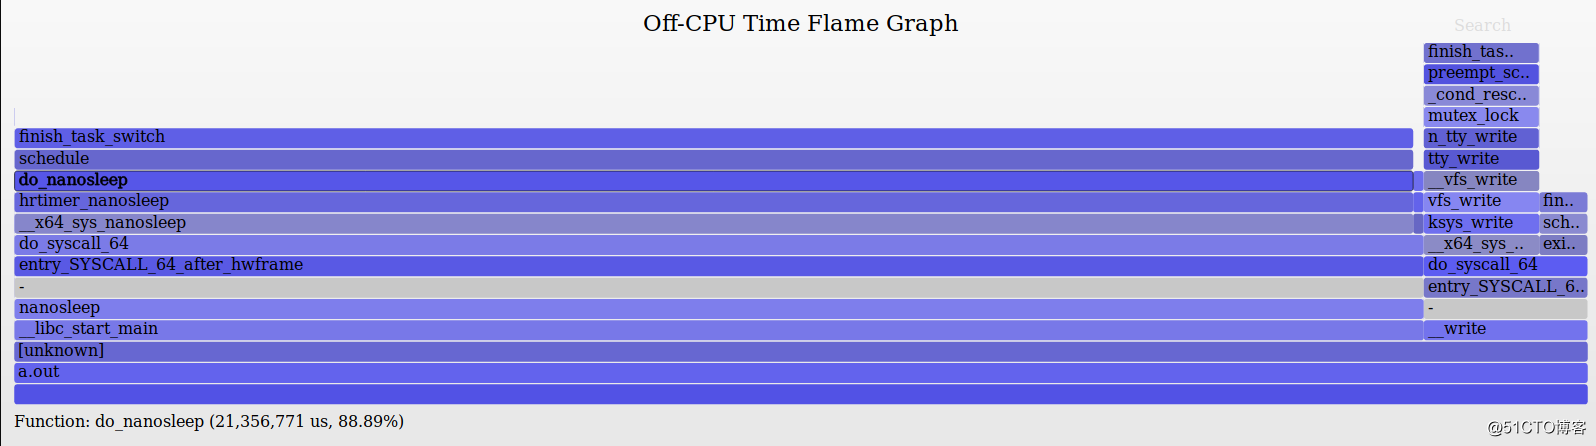 Song Baohua: Linux performance analysis with off-cpu flame graph